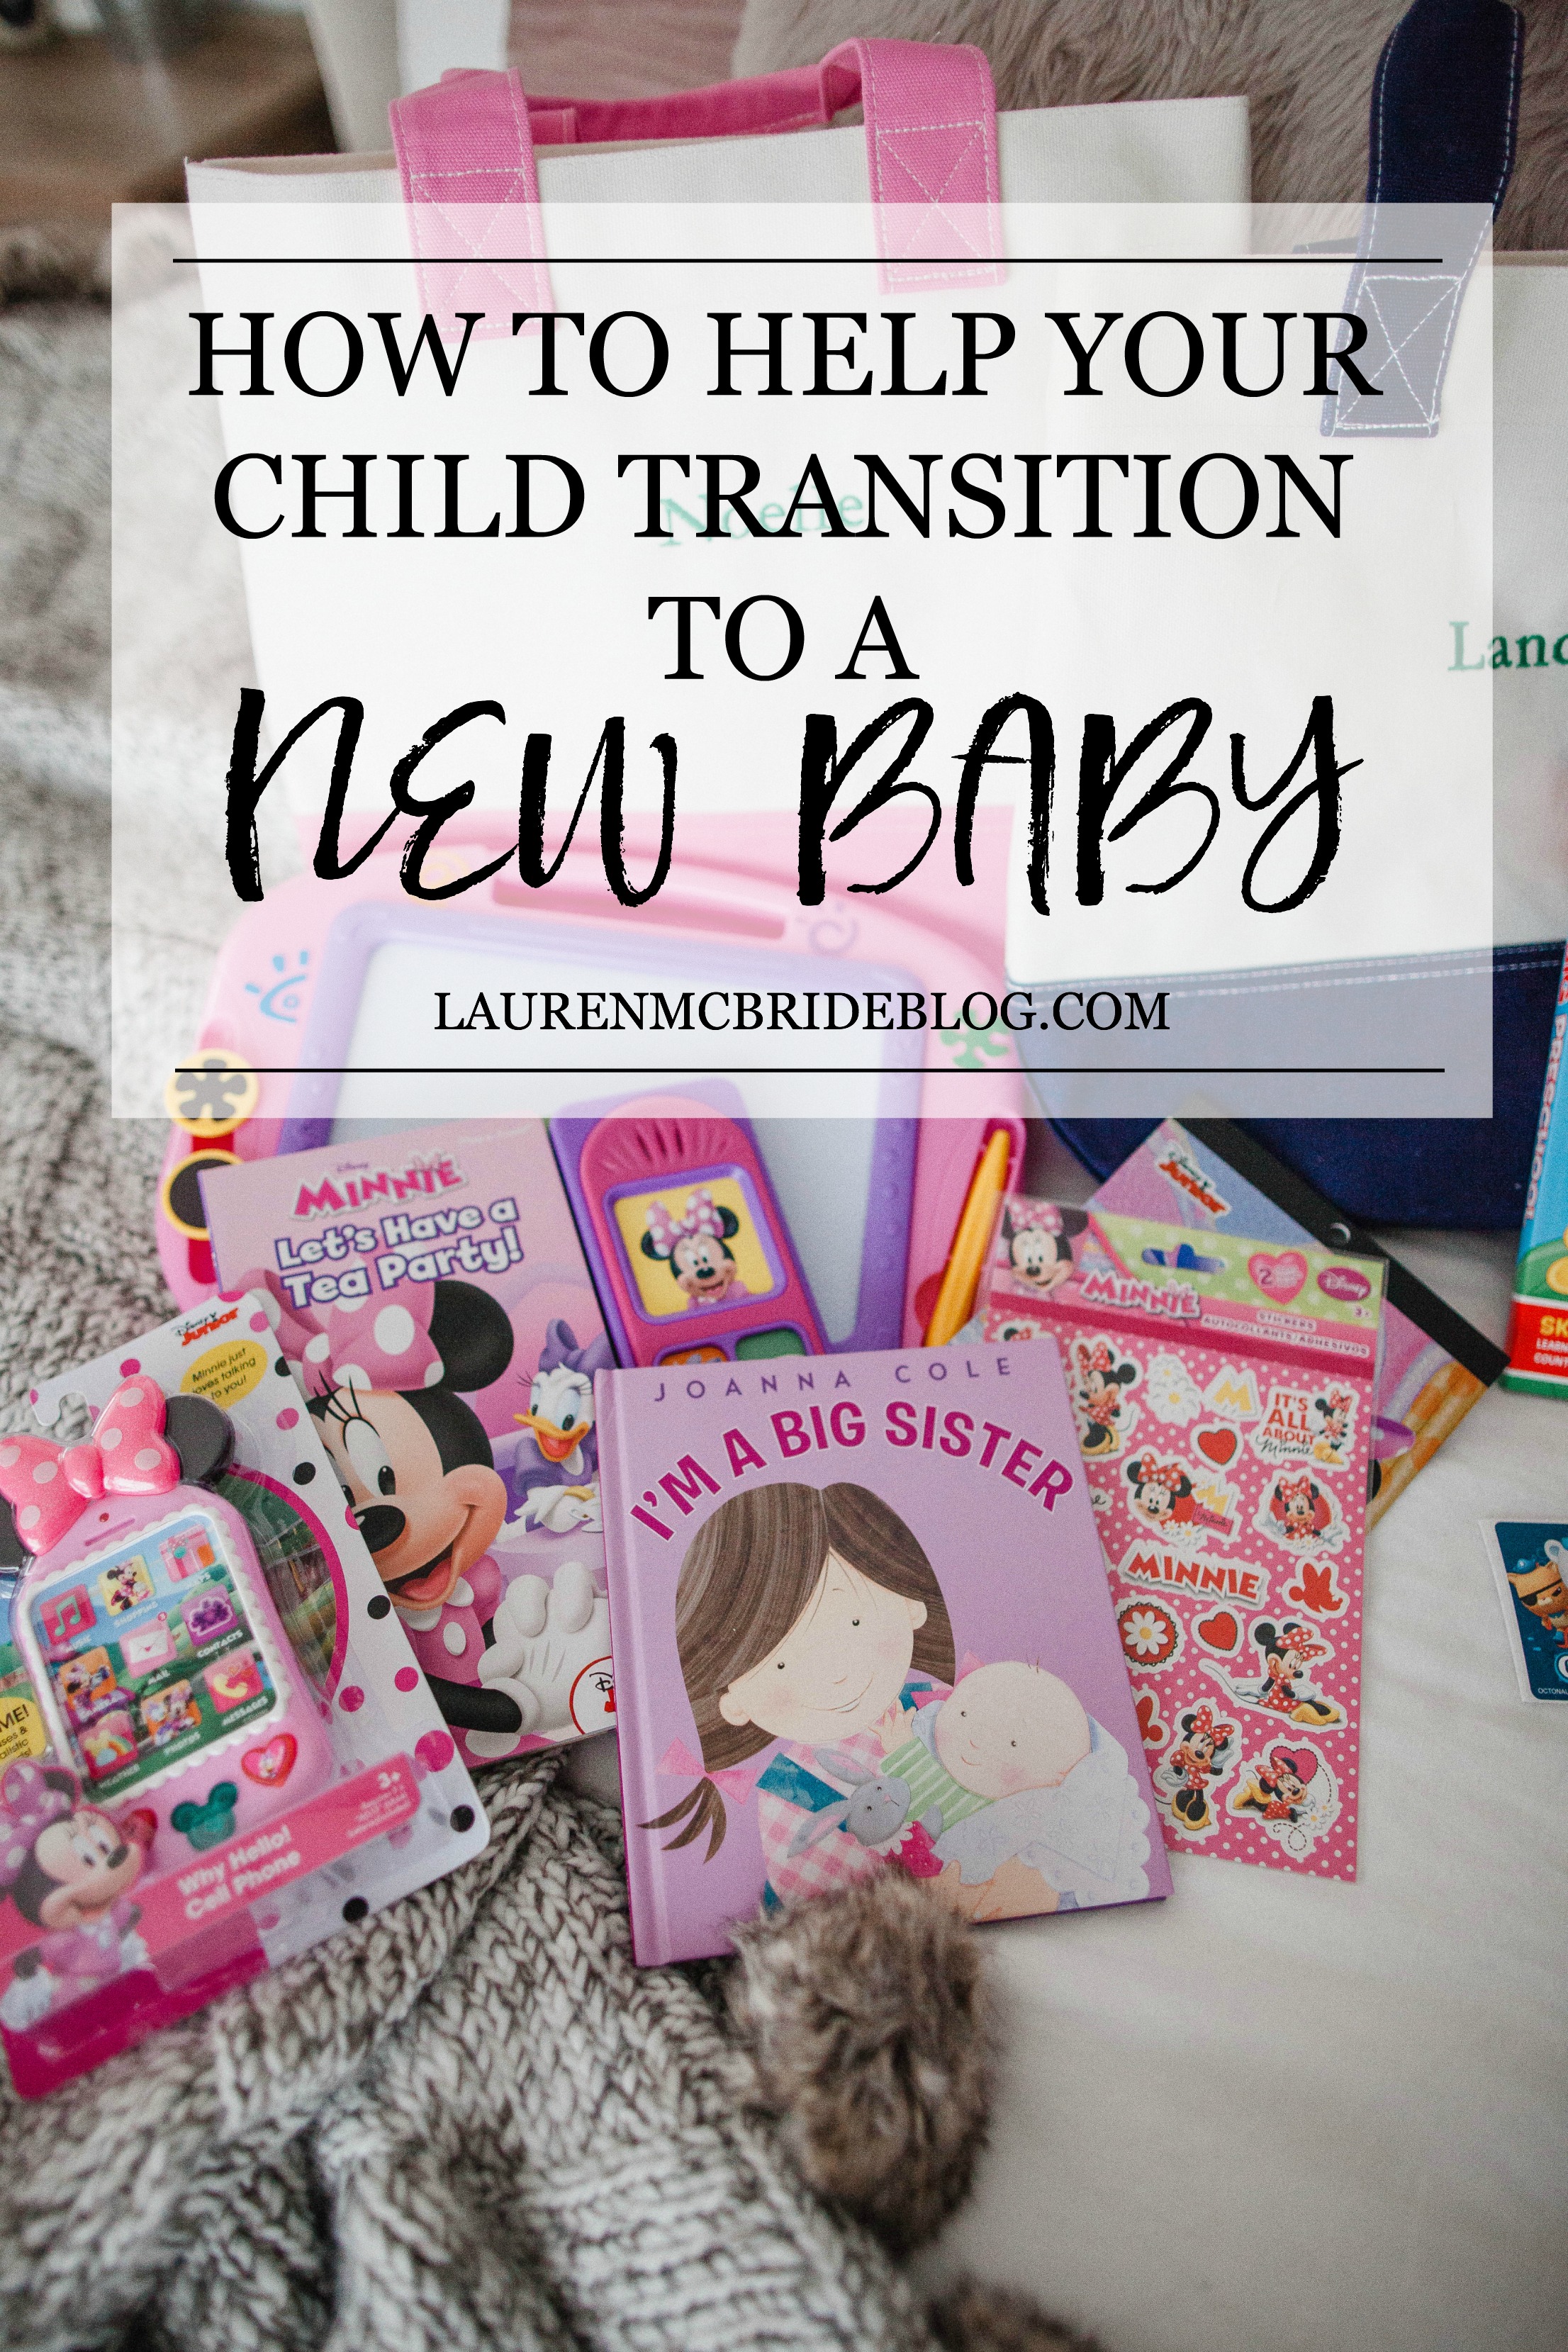 Life and style blogger Lauren McBride shares her tips on How to Help Your Child Transition to a New Baby, including fun big brother/sister bags!